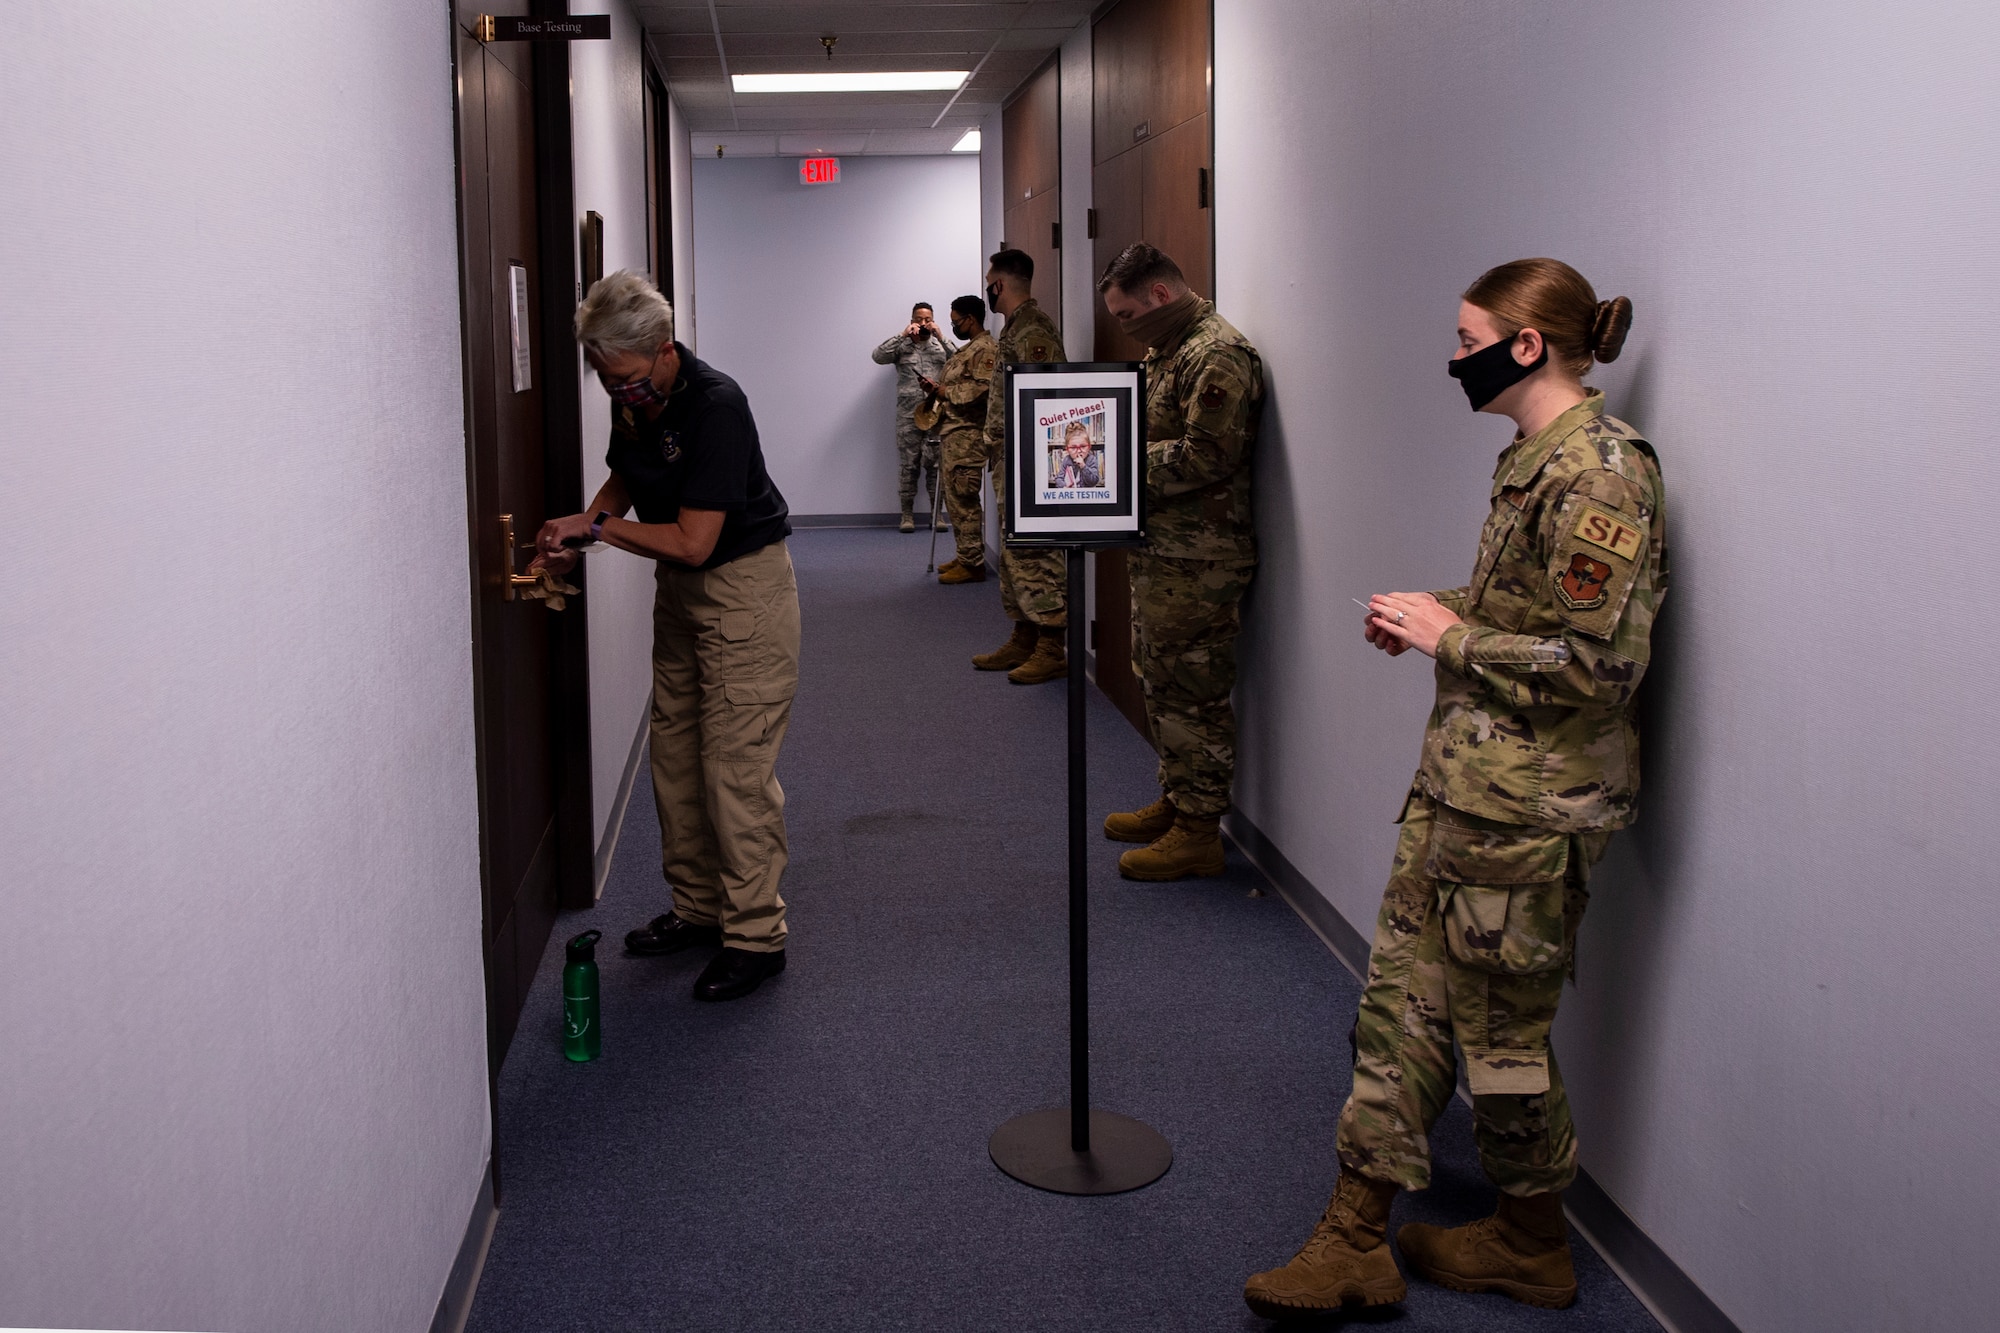 Jill Coles, the test control manager for the 97th Force Support Squadron, opens the base testing classroom prior to administering the Weighted Airmen Promotion System test, May 20, 2020 at Altus Air Force Base, Oklahoma.